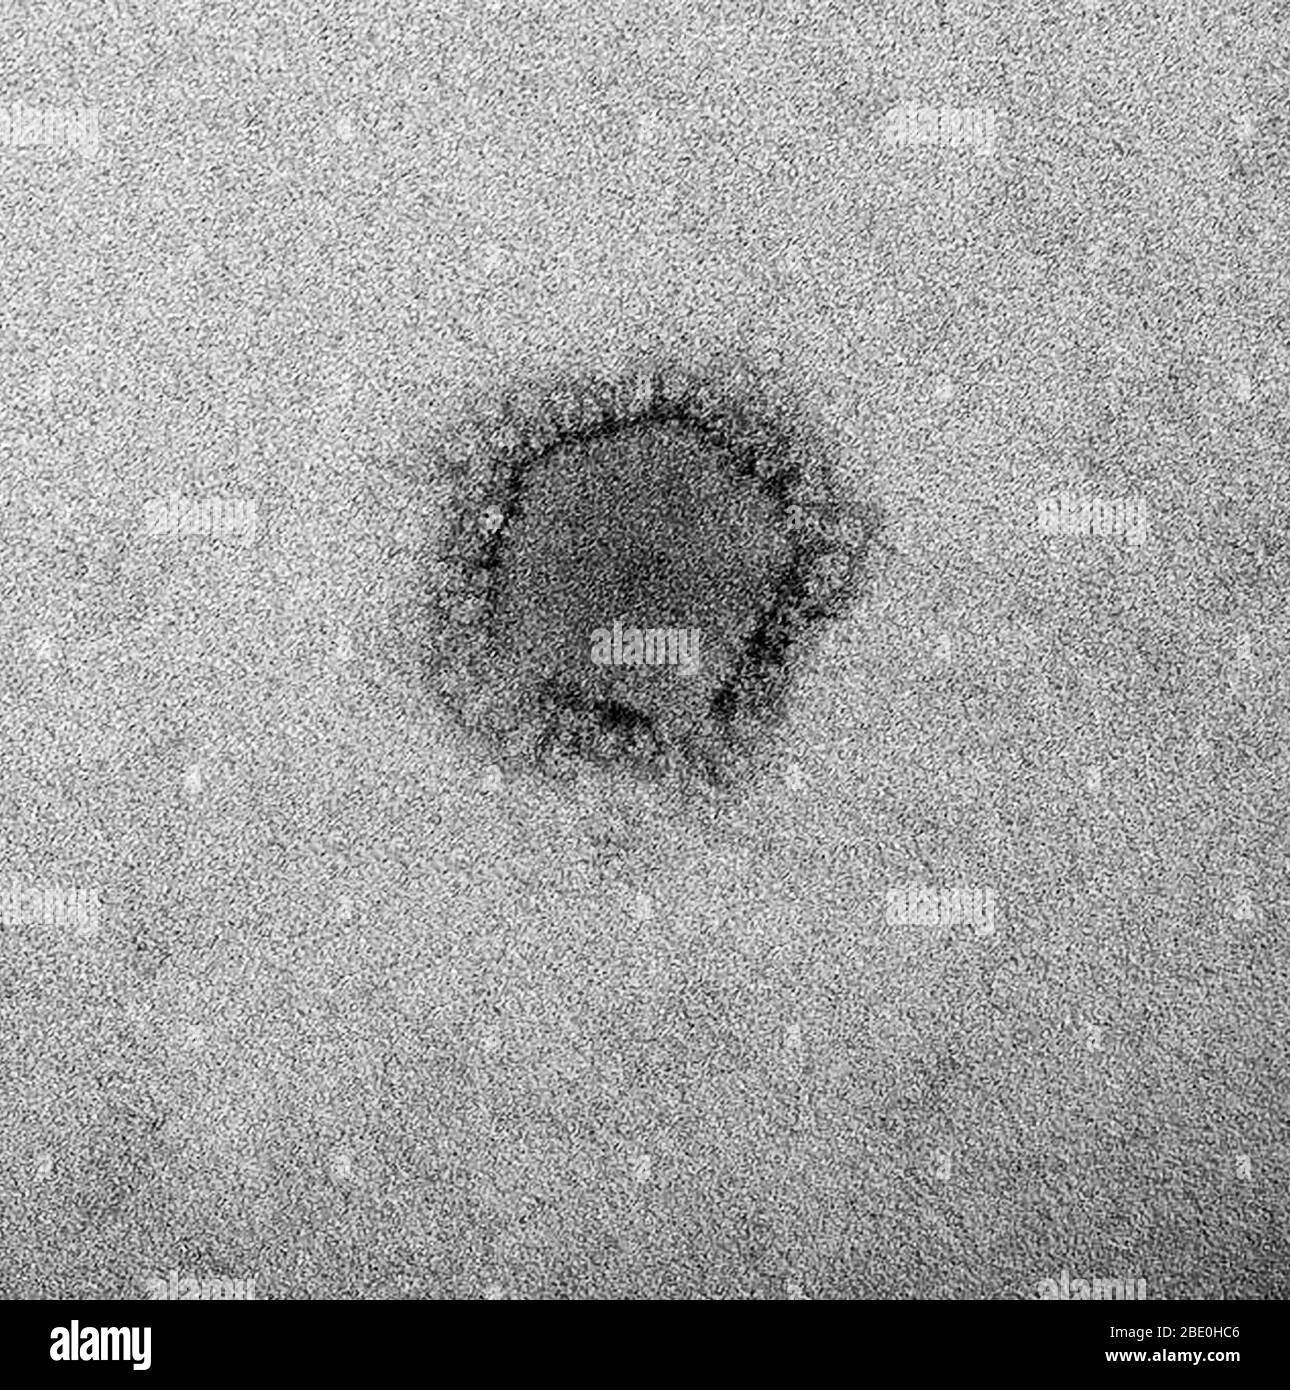 Negative-stain transmission electron micrograph (TEM) showing a MERS-CoV particle with club-shaped surface projections surrounding the periphery of the particle, which is a characteristic feature of coronaviruses. Middle East respiratory syndrome coronavirus (MERS-CoV) is a novel coronavirus (nCoV) first reported on 24 September 2012 by Egyptian virologist Dr. Ali Mohamed Zaki in Jeddah, Saudi Arabia. He isolated and identified a previously unknown coronavirus from the lungs of a 60-year-old male patient with acute pneumonia and acute renal failure. MERS-CoV is the sixth new type of coronaviru Stock Photo